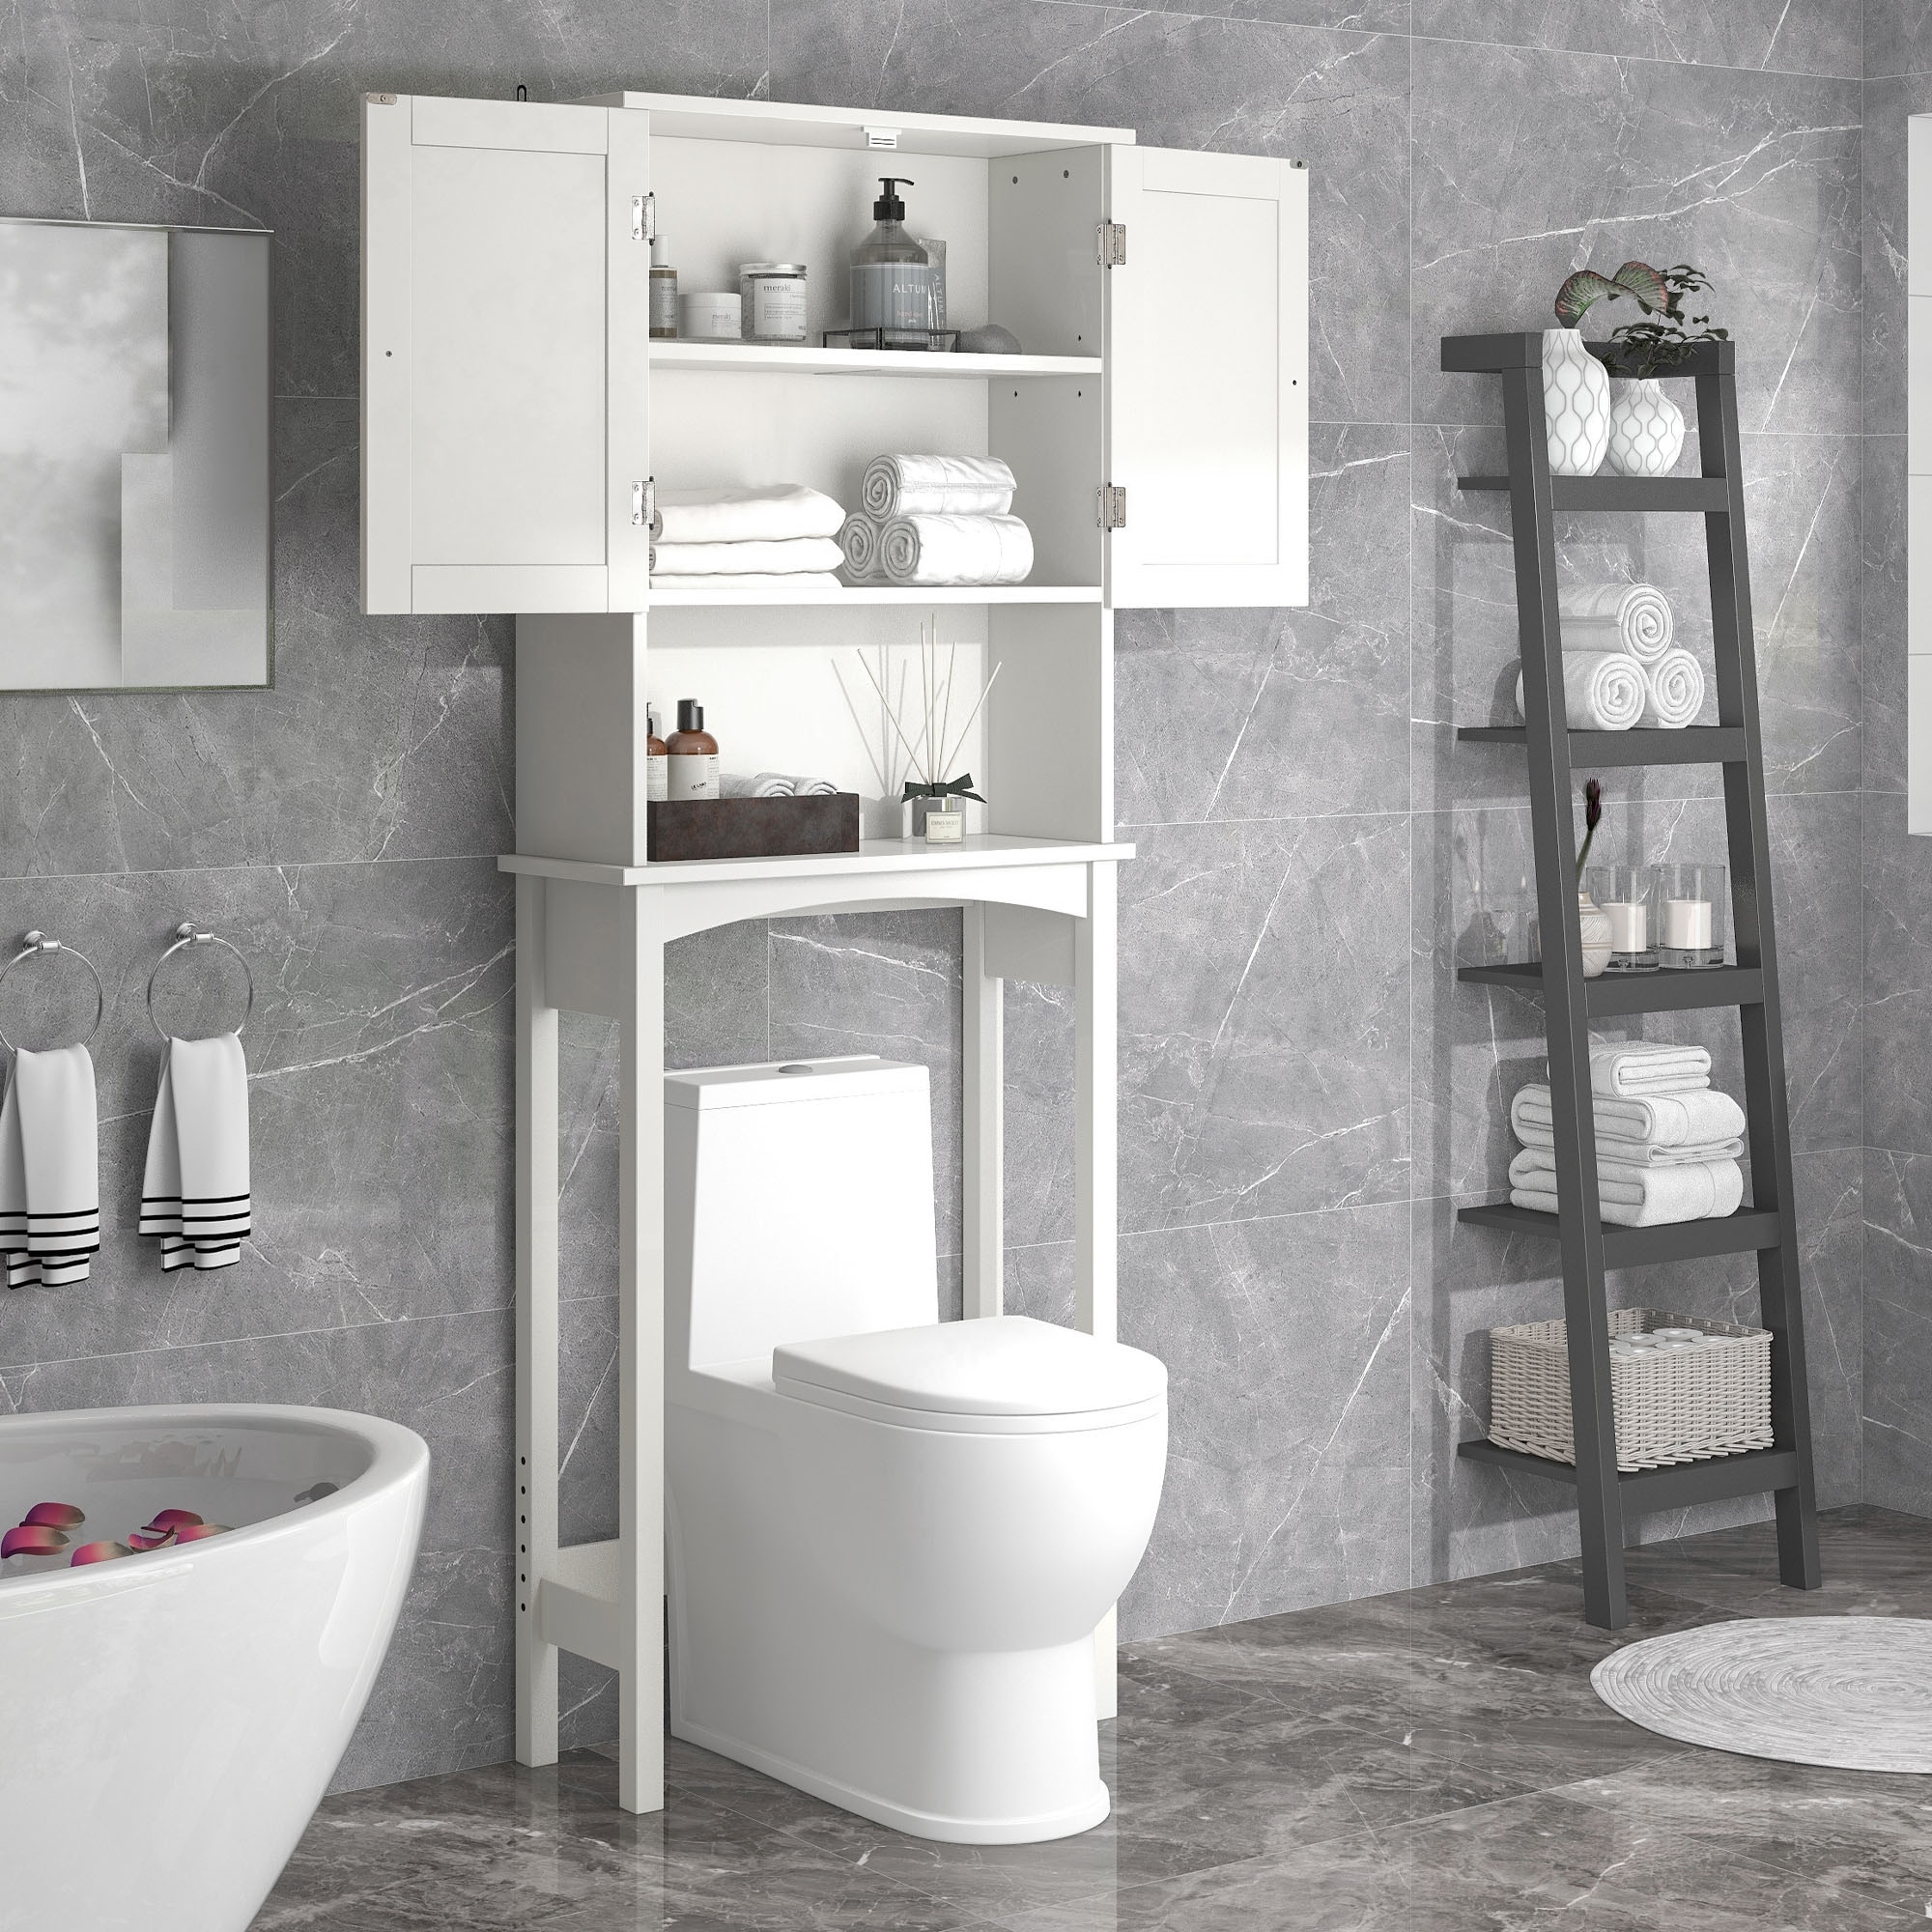 https://ak1.ostkcdn.com/images/products/is/images/direct/a859df7c76a29d3fc340fb336de35acf7c6f434d/Over-The-Toilet-Bathroom-Cabinet-with-Shelf-and-Two-Doors-Space-Saving-Storage.jpg